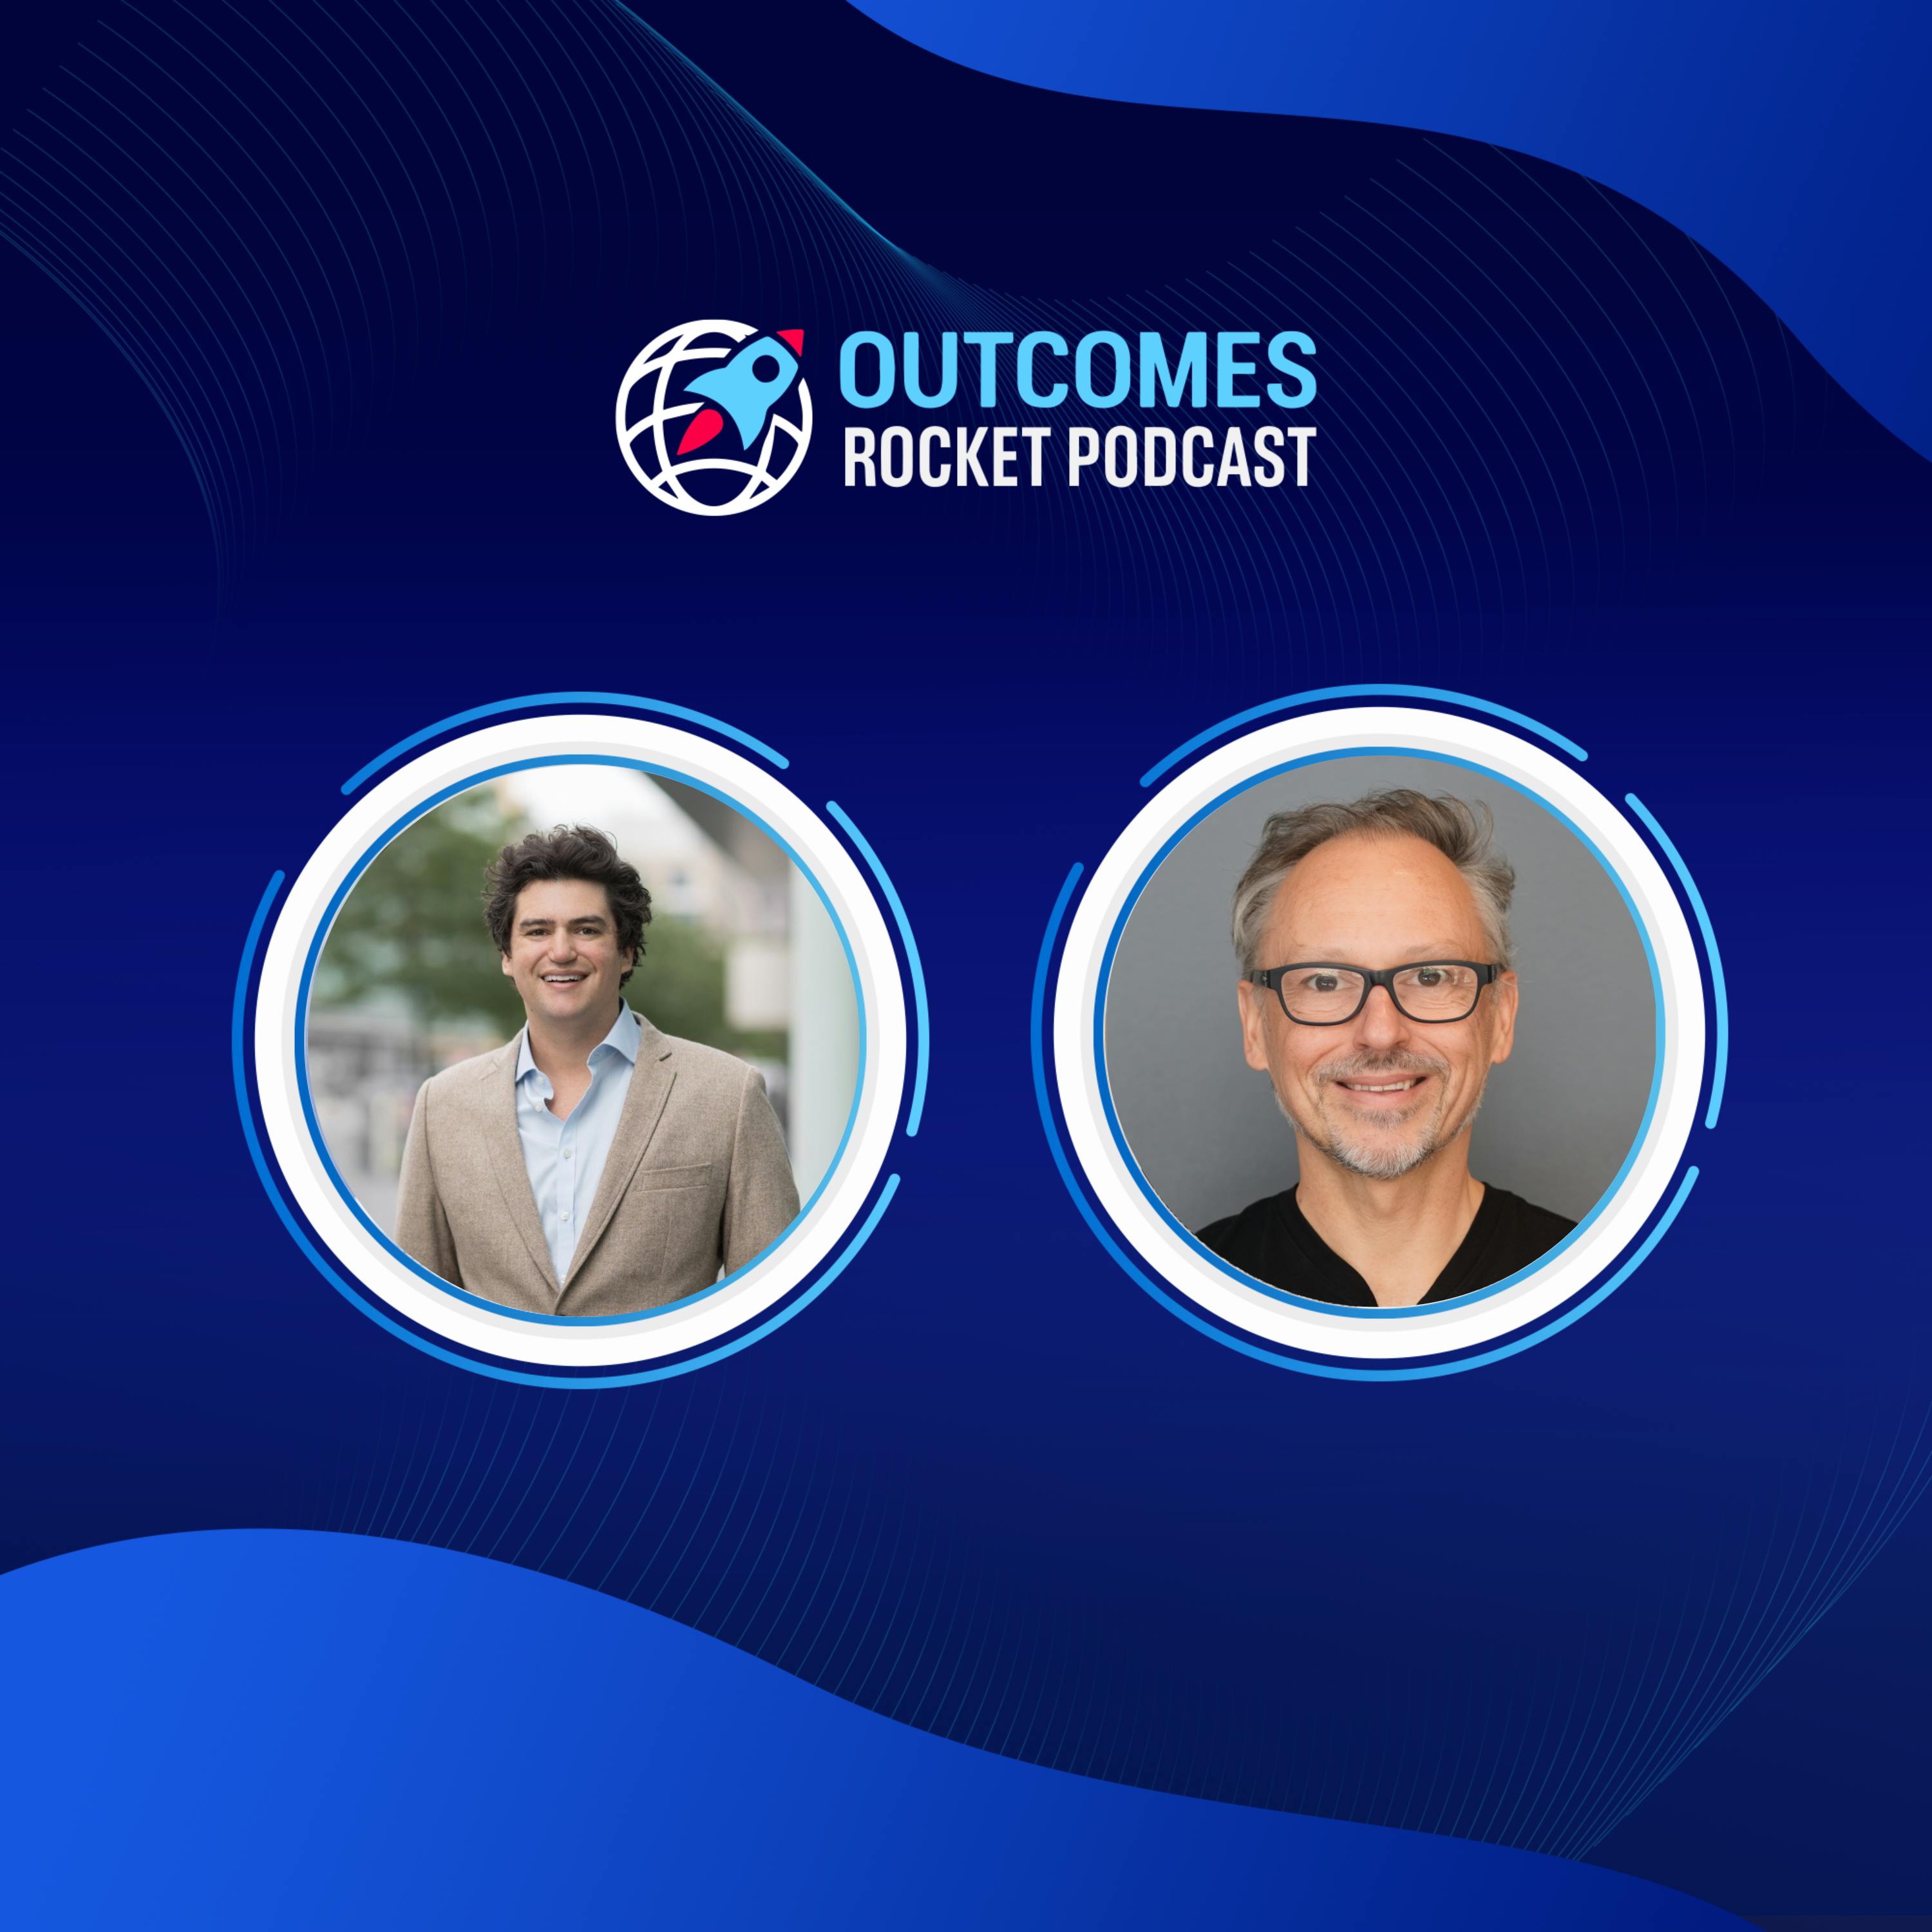 Innovations in Data Governance, AI, and Knowledge Management for Better Outcomes with James Kugler, CEO of EMD Digital at Merck KGaA and Director of Syntropy, and Carl Bate, founder & CEO at Evidium